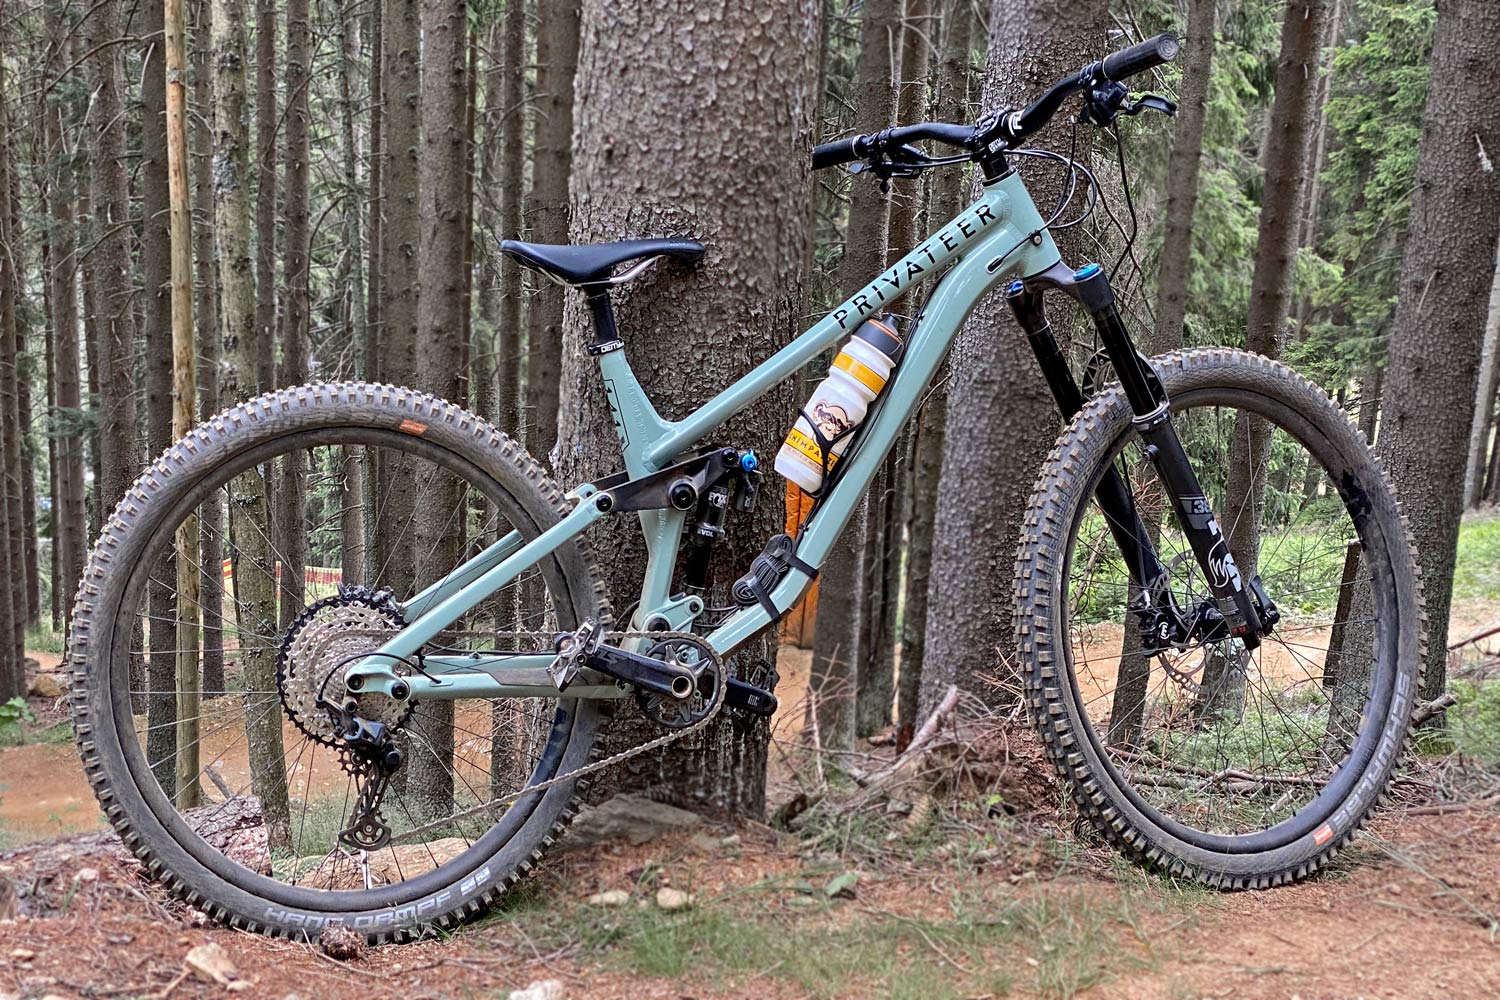 Privateer 141 all-mountain trail bike, affordable alloy 29er trail enduro all-mountain bike, complete